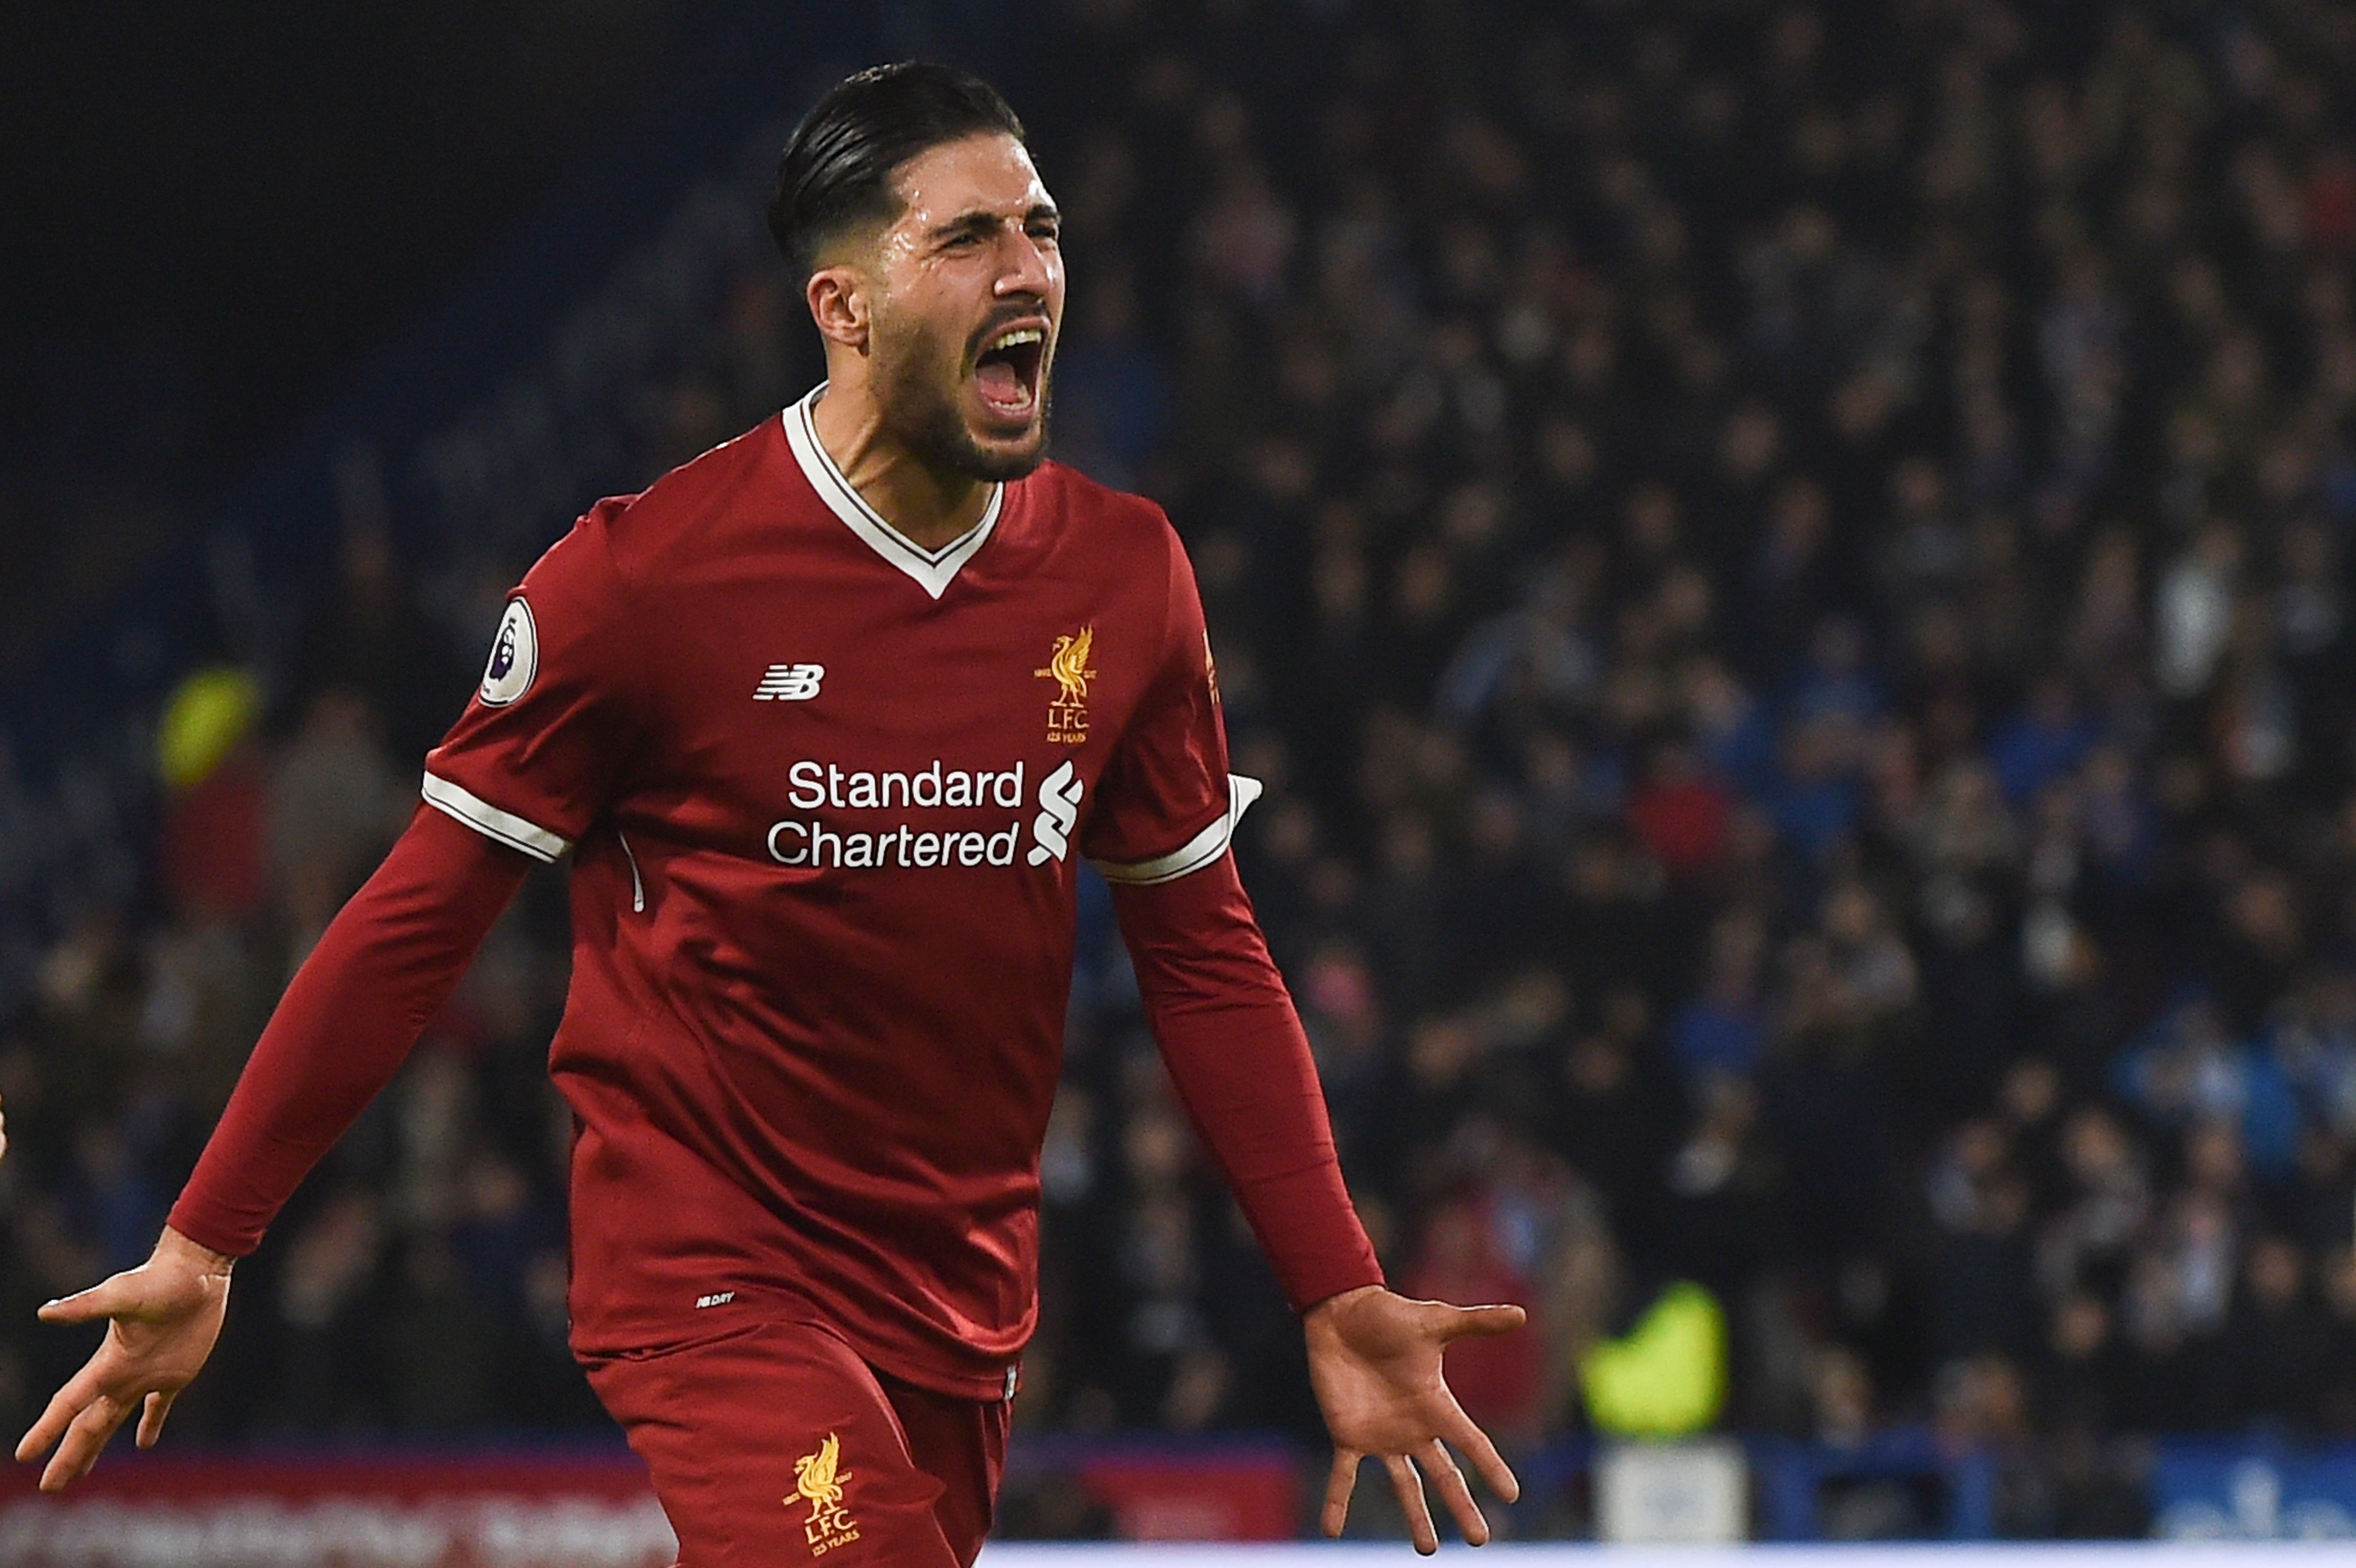 Liverpool's German midfielder Emre Can celebrates scoring the opening goal during the English Premier League football match between Huddersfield Town and Liverpool at the John Smith's stadium in Huddersfield, northern England on January 30, 2018. / AFP PHOTO / PAUL ELLIS / RESTRICTED TO EDITORIAL USE. No use with unauthorized audio, video, data, fixture lists, club/league logos or 'live' services. Online in-match use limited to 75 images, no video emulation. No use in betting, games or single club/league/player publications.  /         (Photo credit should read PAUL ELLIS/AFP/Getty Images)